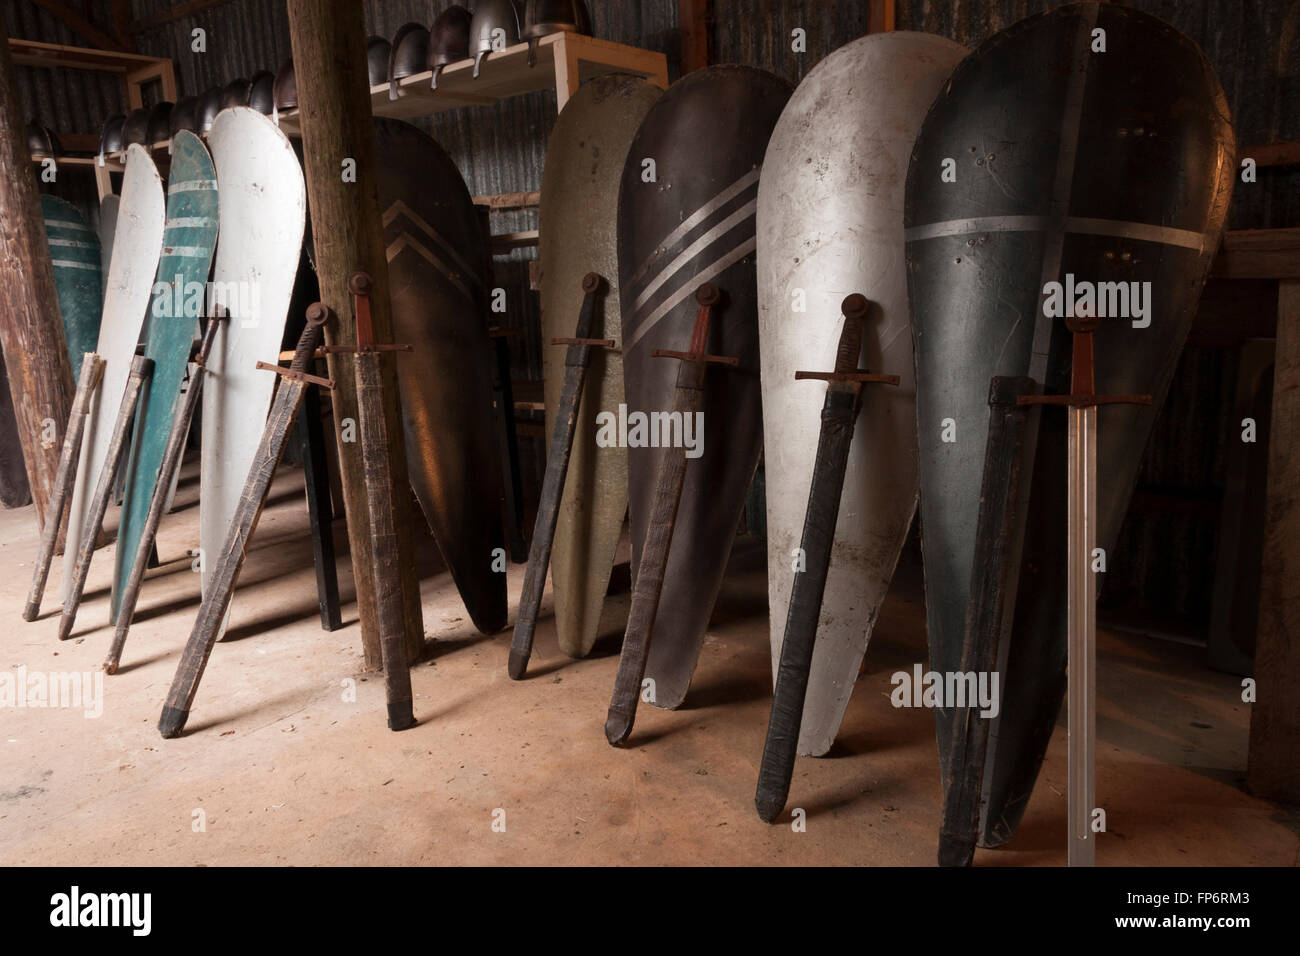 Norman weapons displayed in a barn Stock Photo